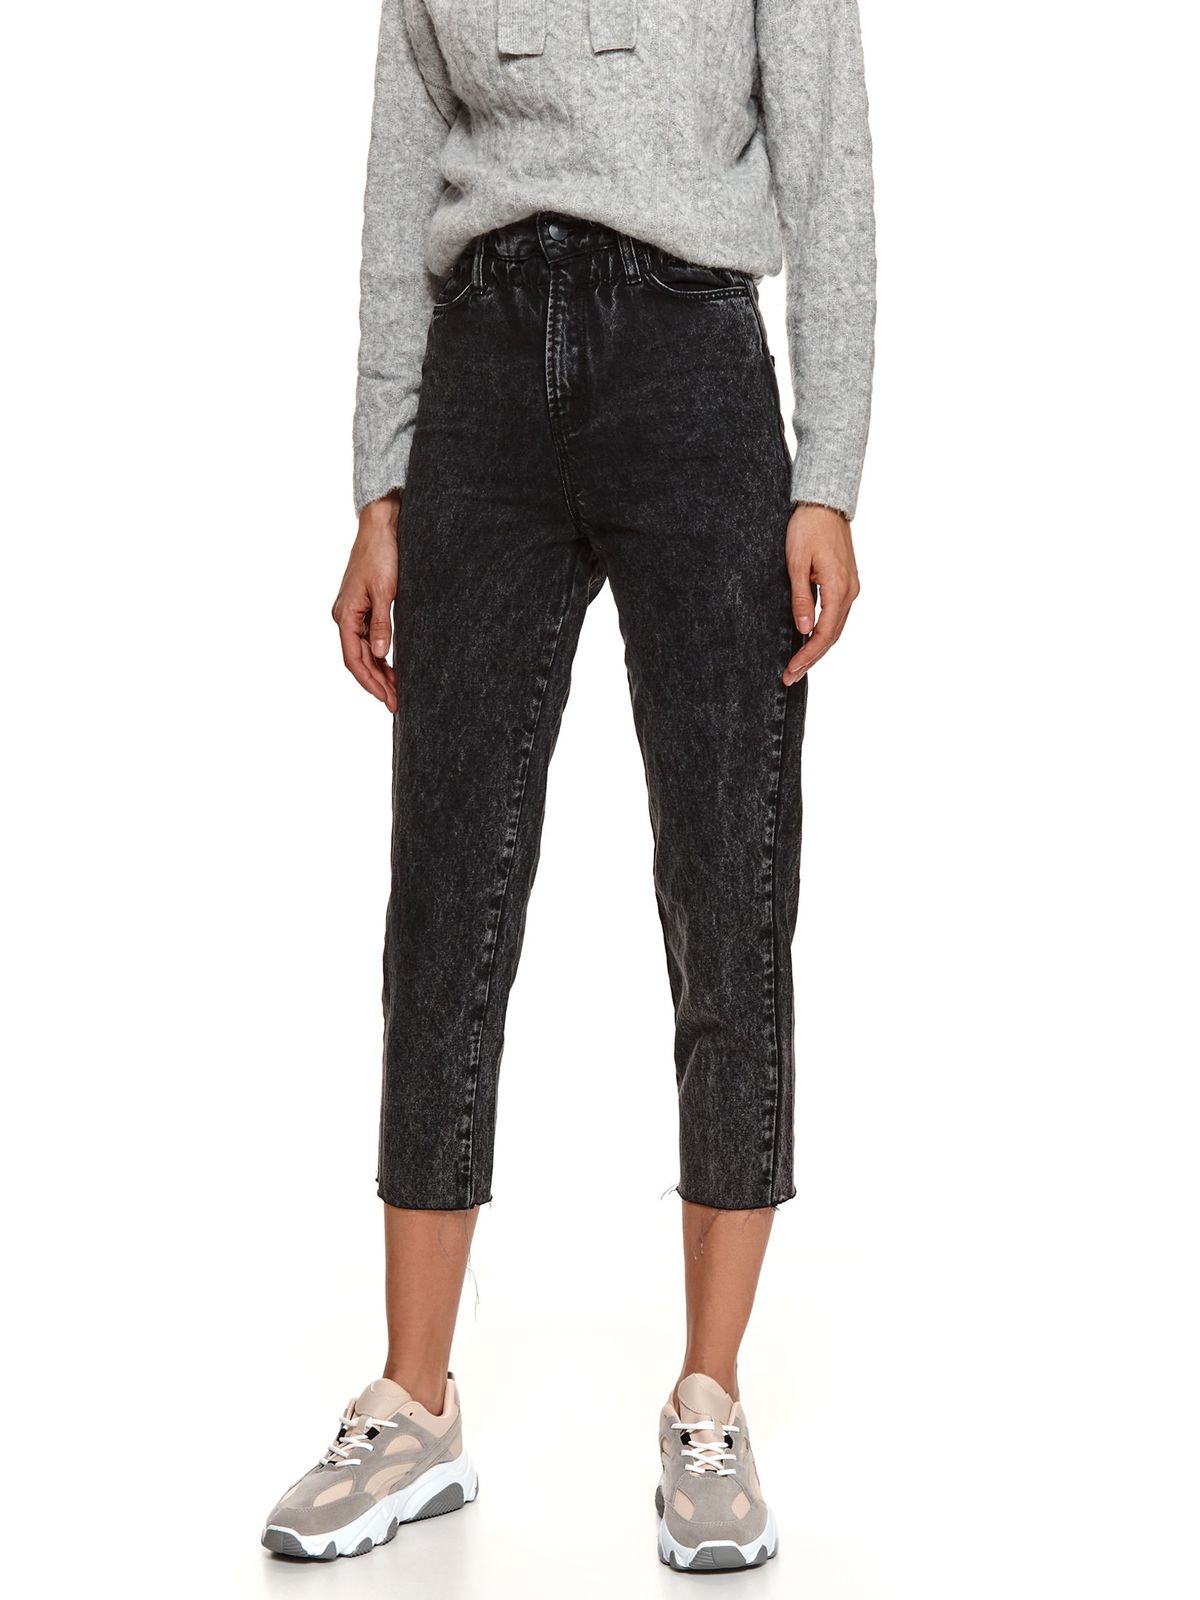 Black trousers denim conical high waisted with pockets 1 - StarShinerS.com